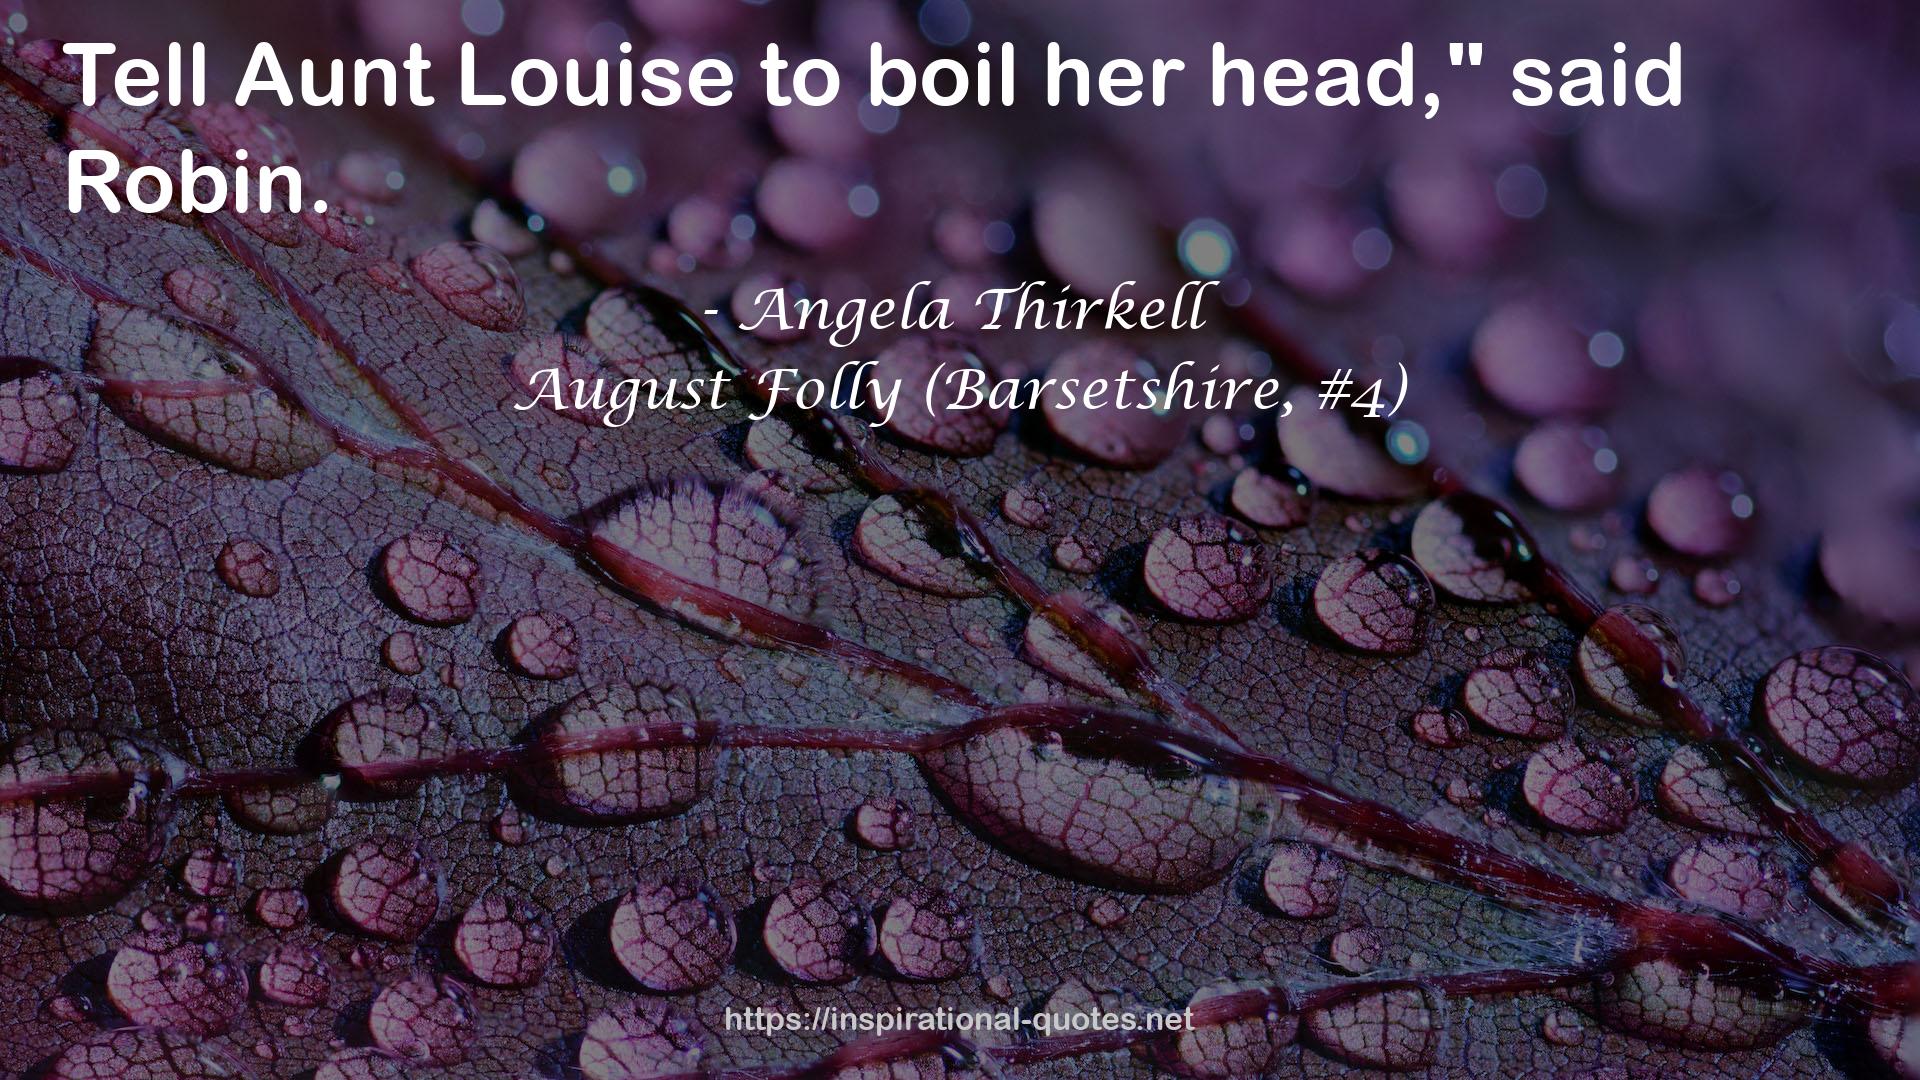 August Folly (Barsetshire, #4) QUOTES